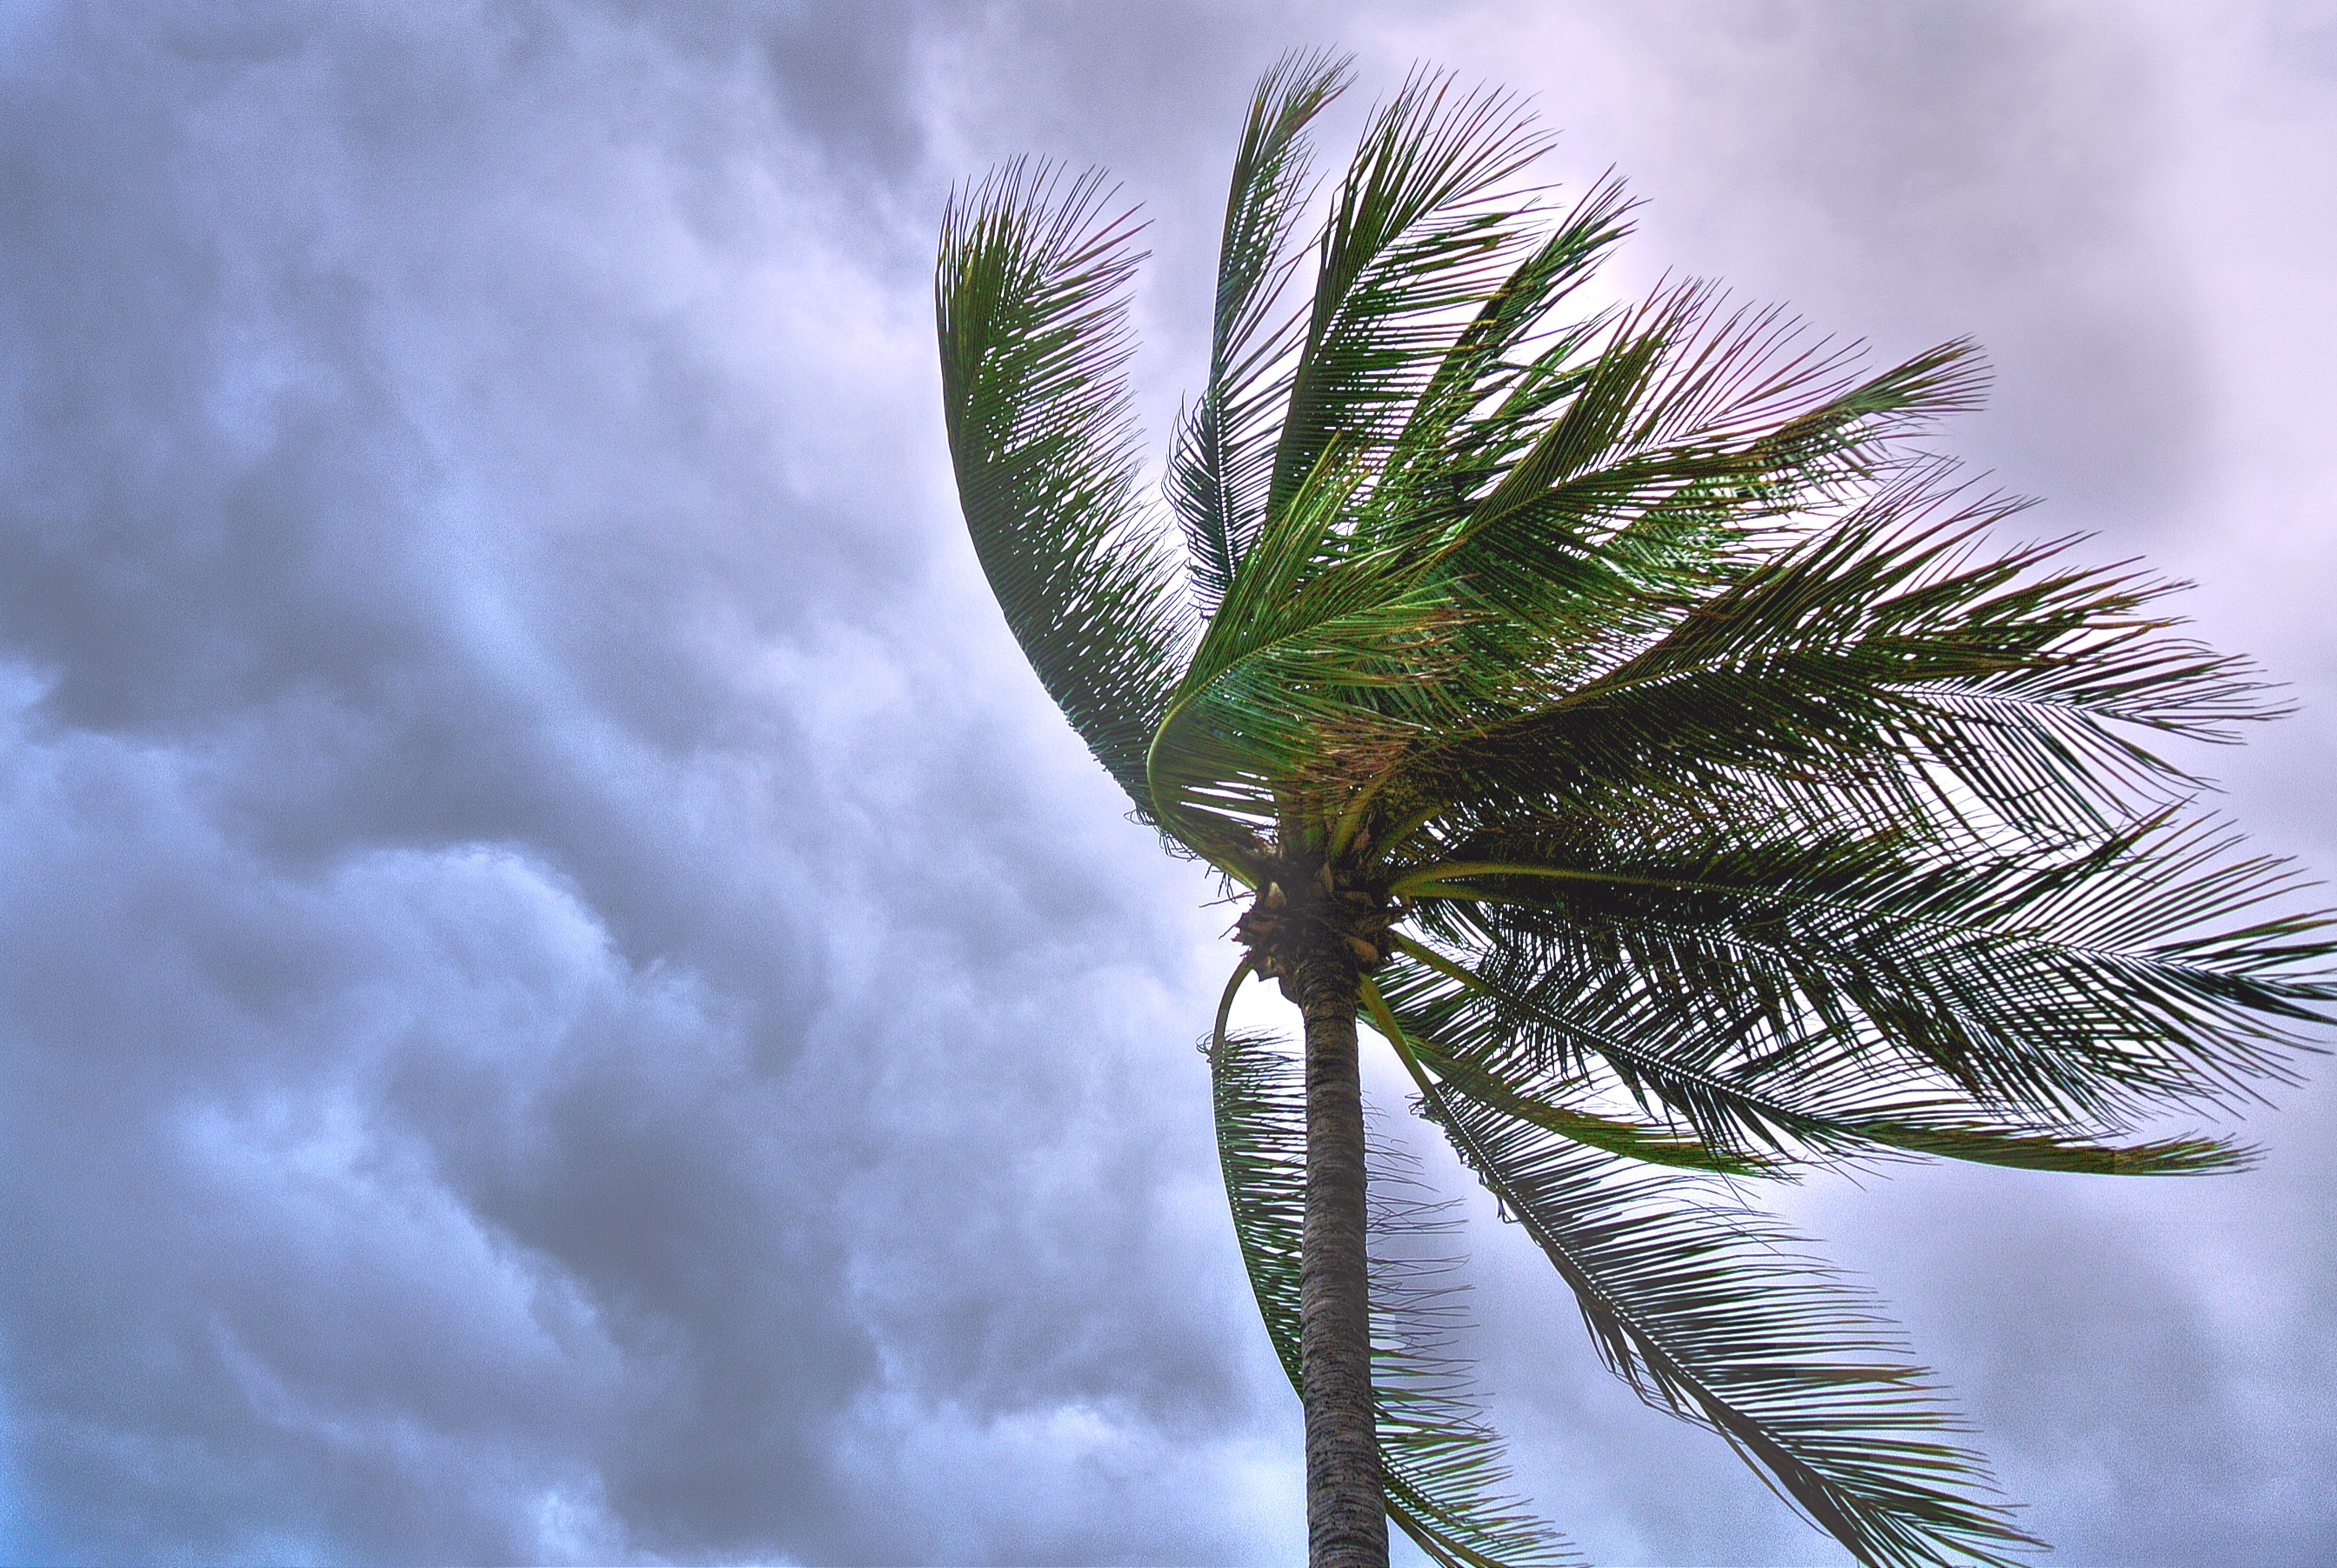 Palm ree blowing in the wind of an approaching storm